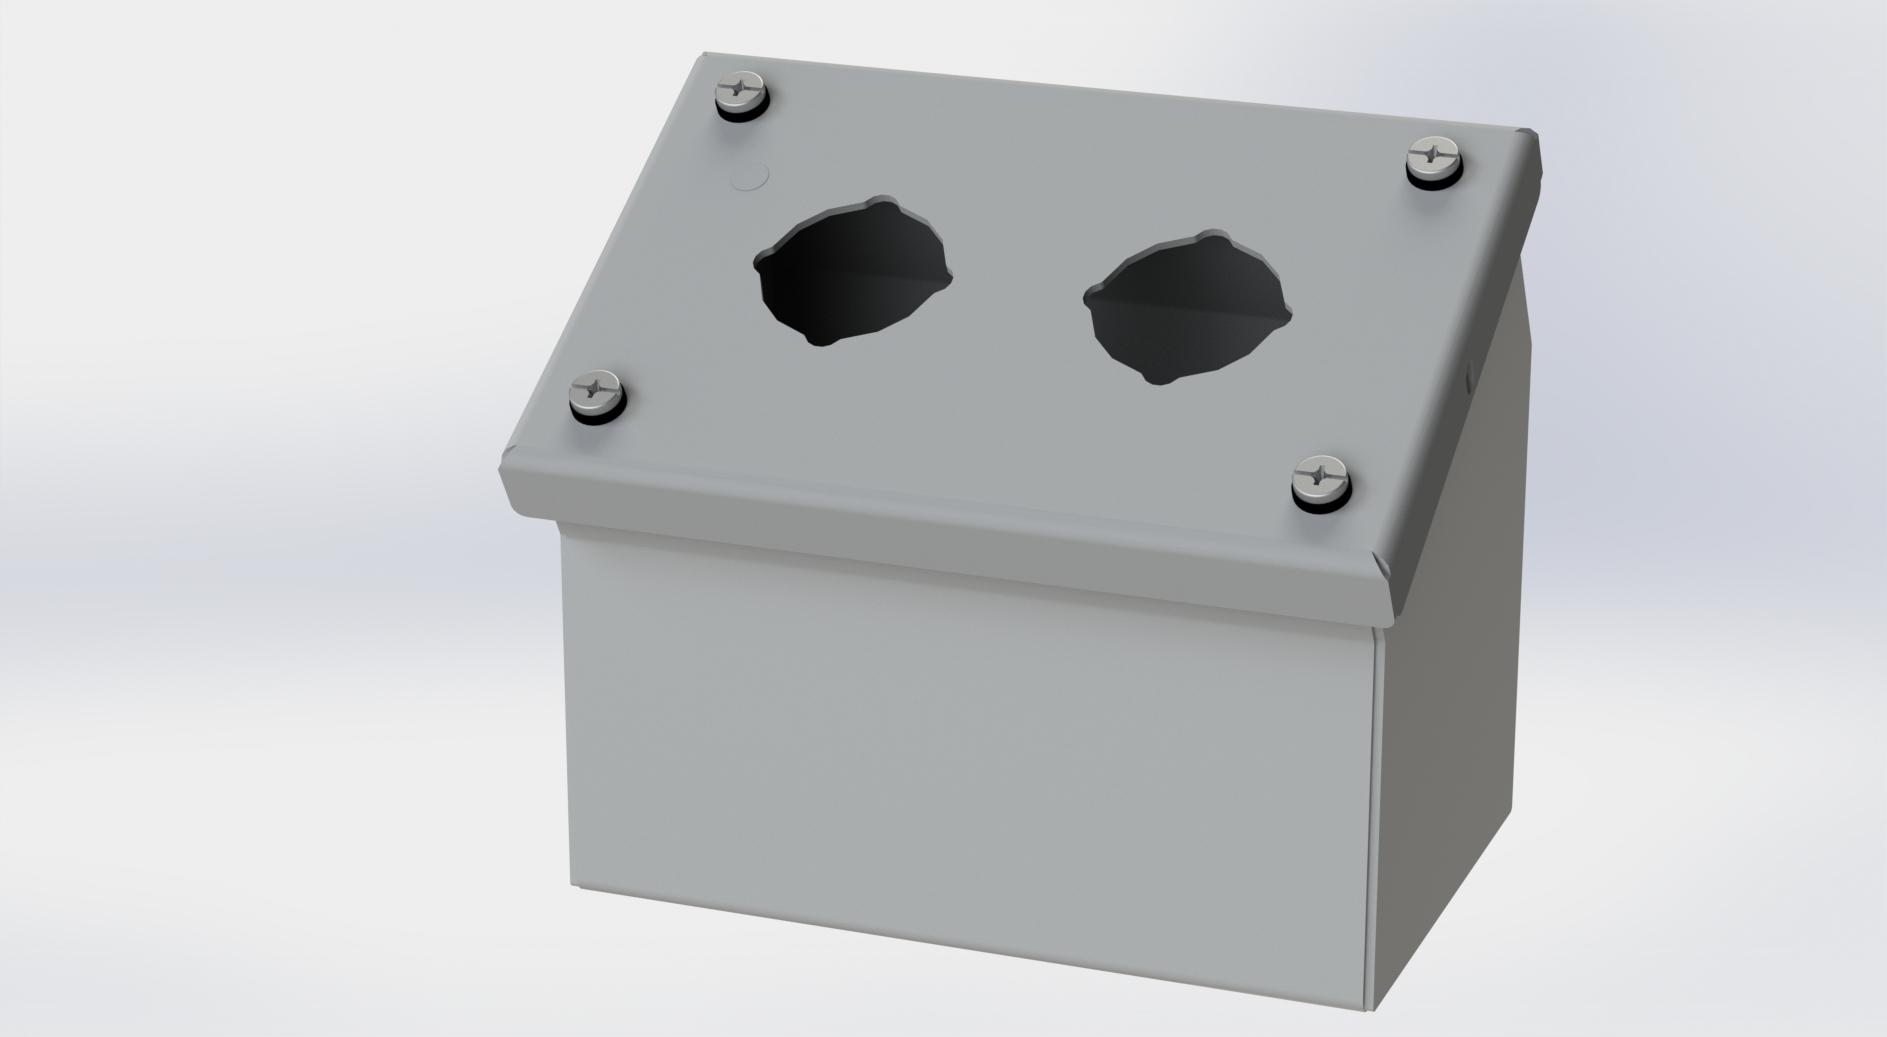 Saginaw Control SCE-2PBA PBA Enclosure, Height:3.50", Width:5.50", Depth:4.87", ANSI-61 gray powder coating inside and out.